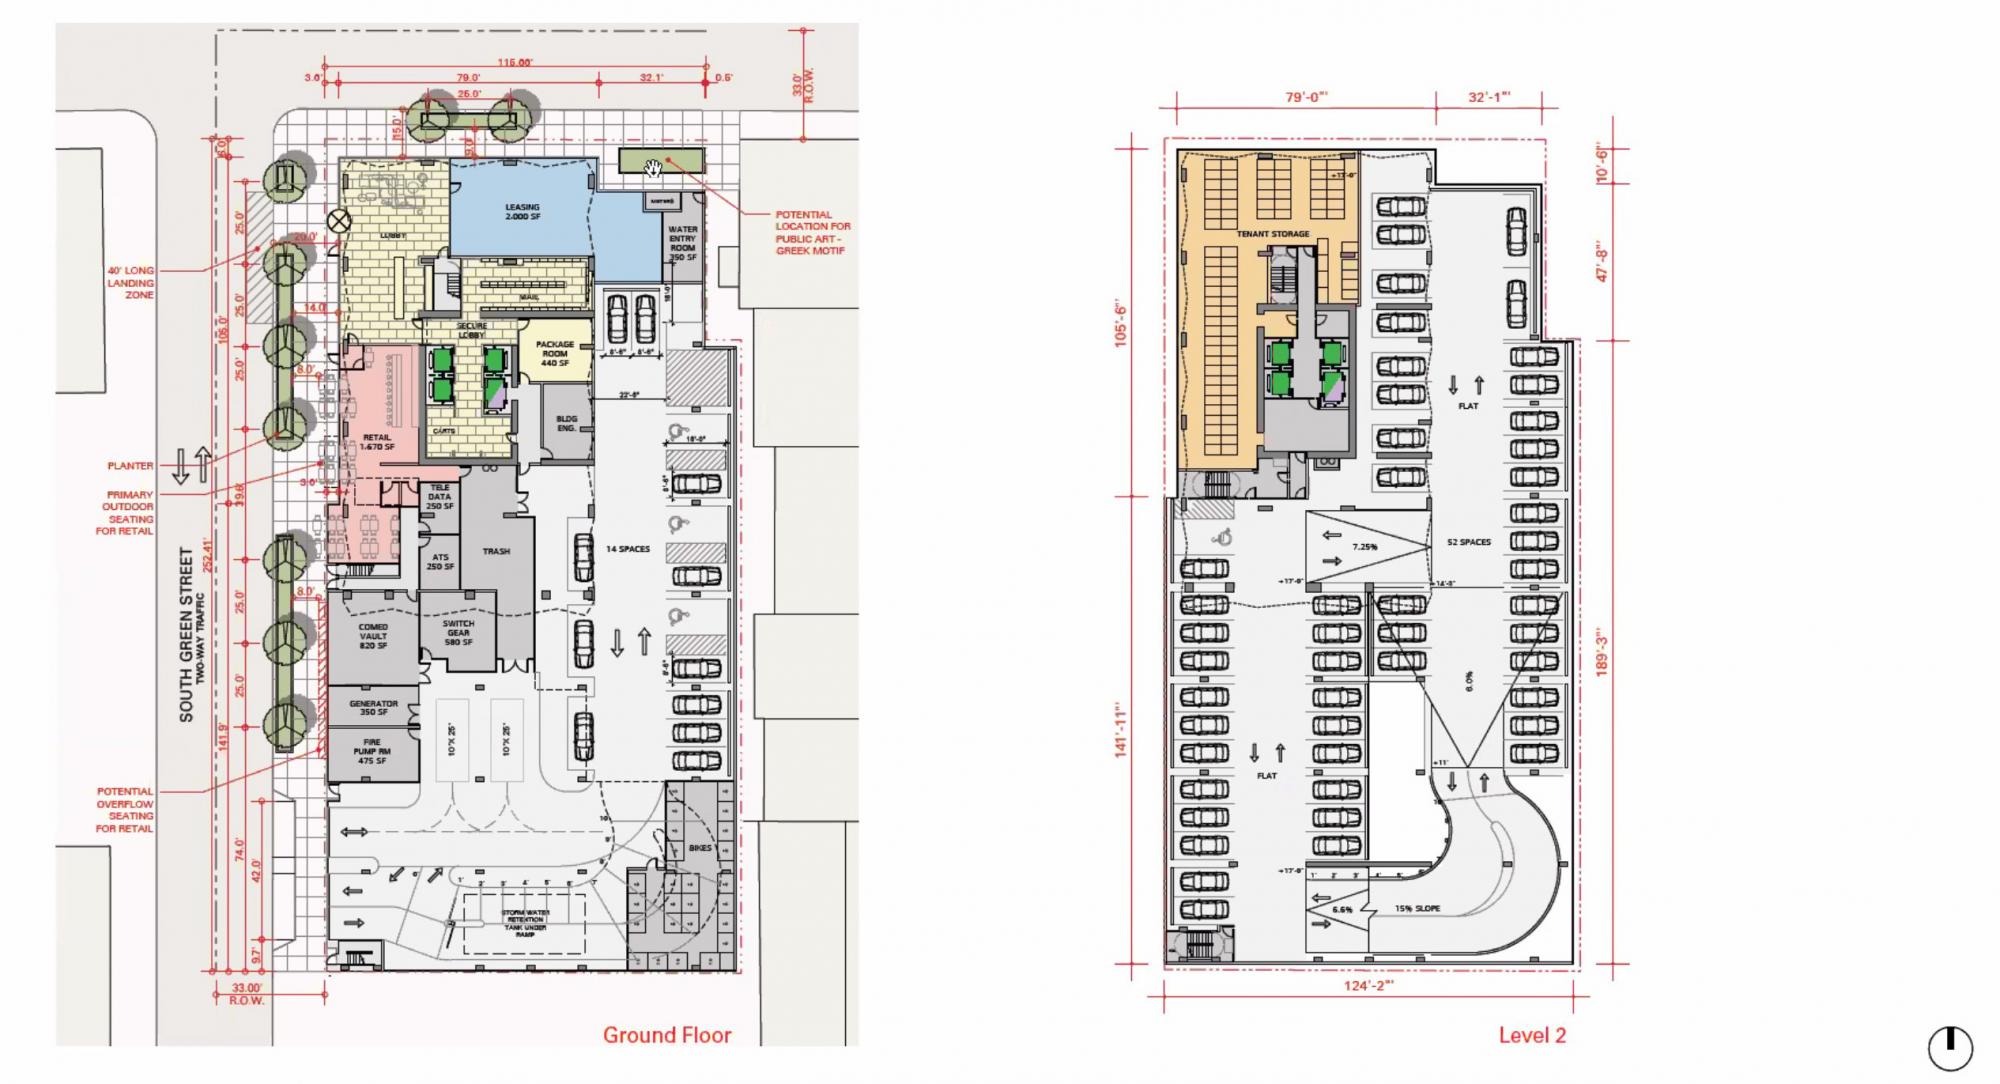 301 S State Street first and second floor plans